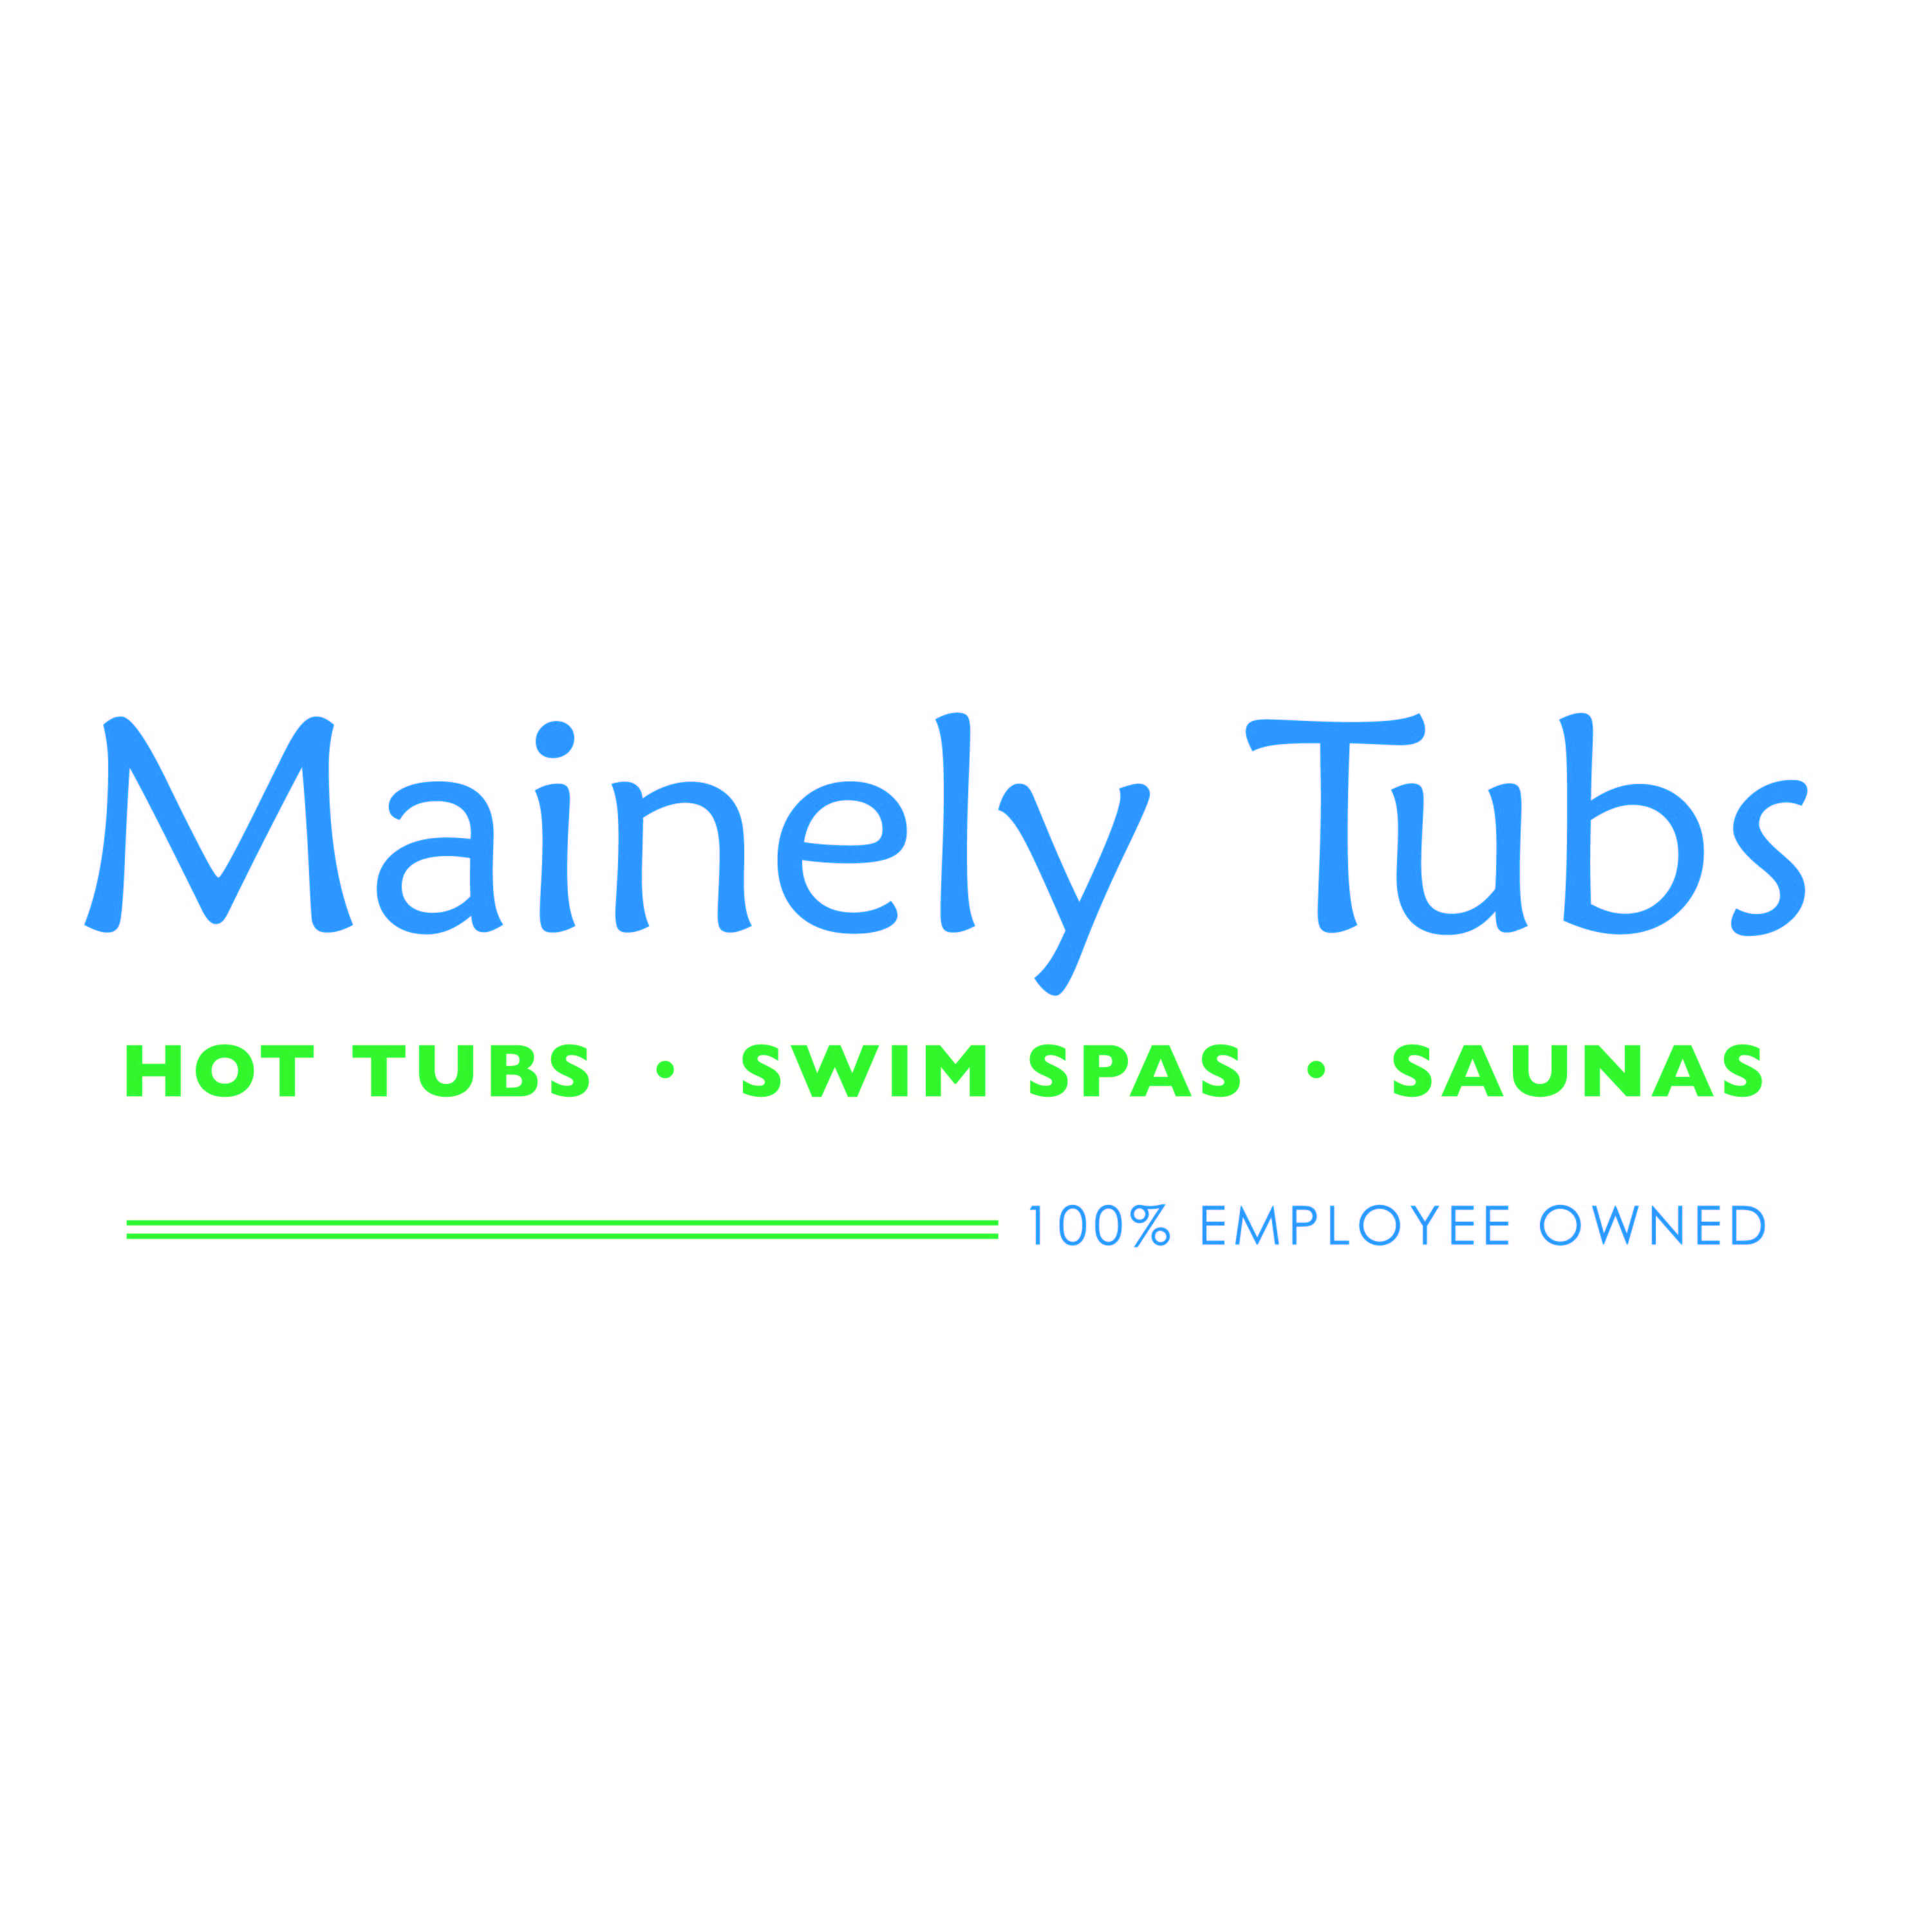 Mainely Tubs